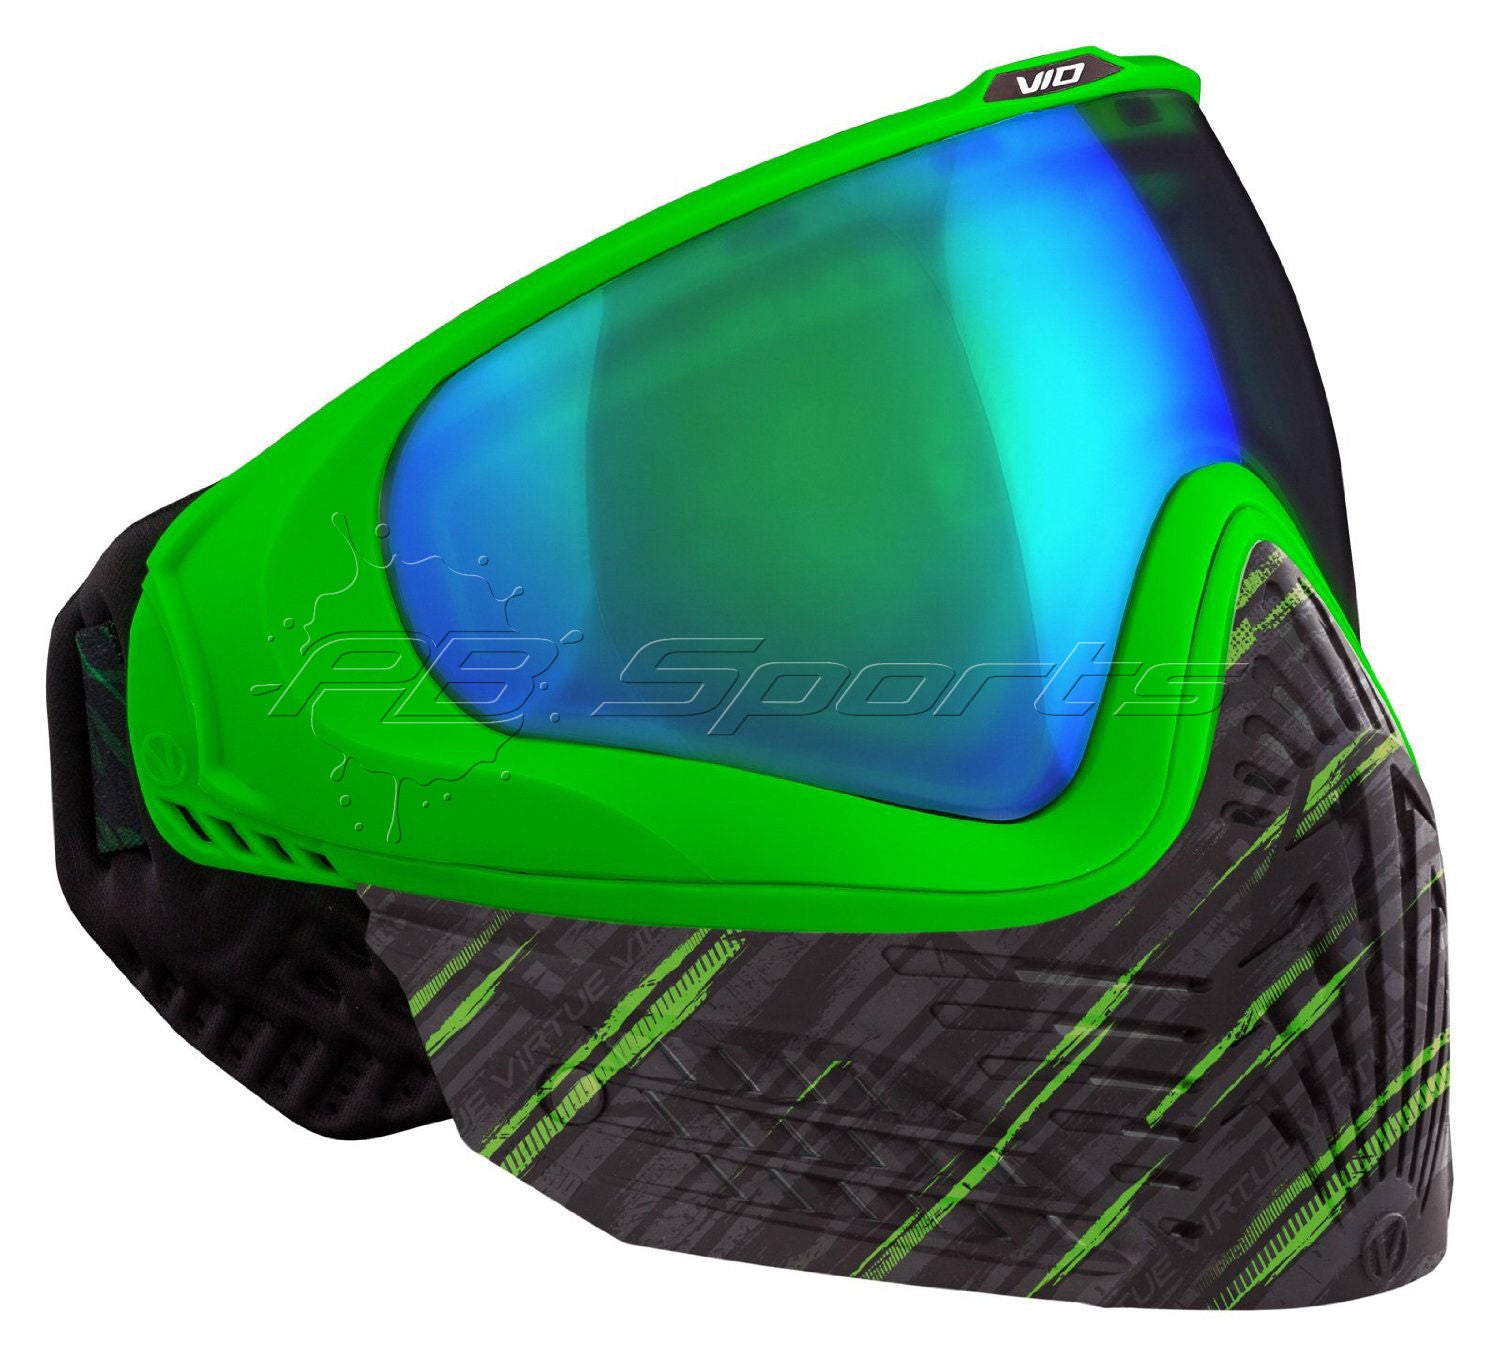 Virtue Vio Extend Thermal Mask - Graphic Emerald - Virtue